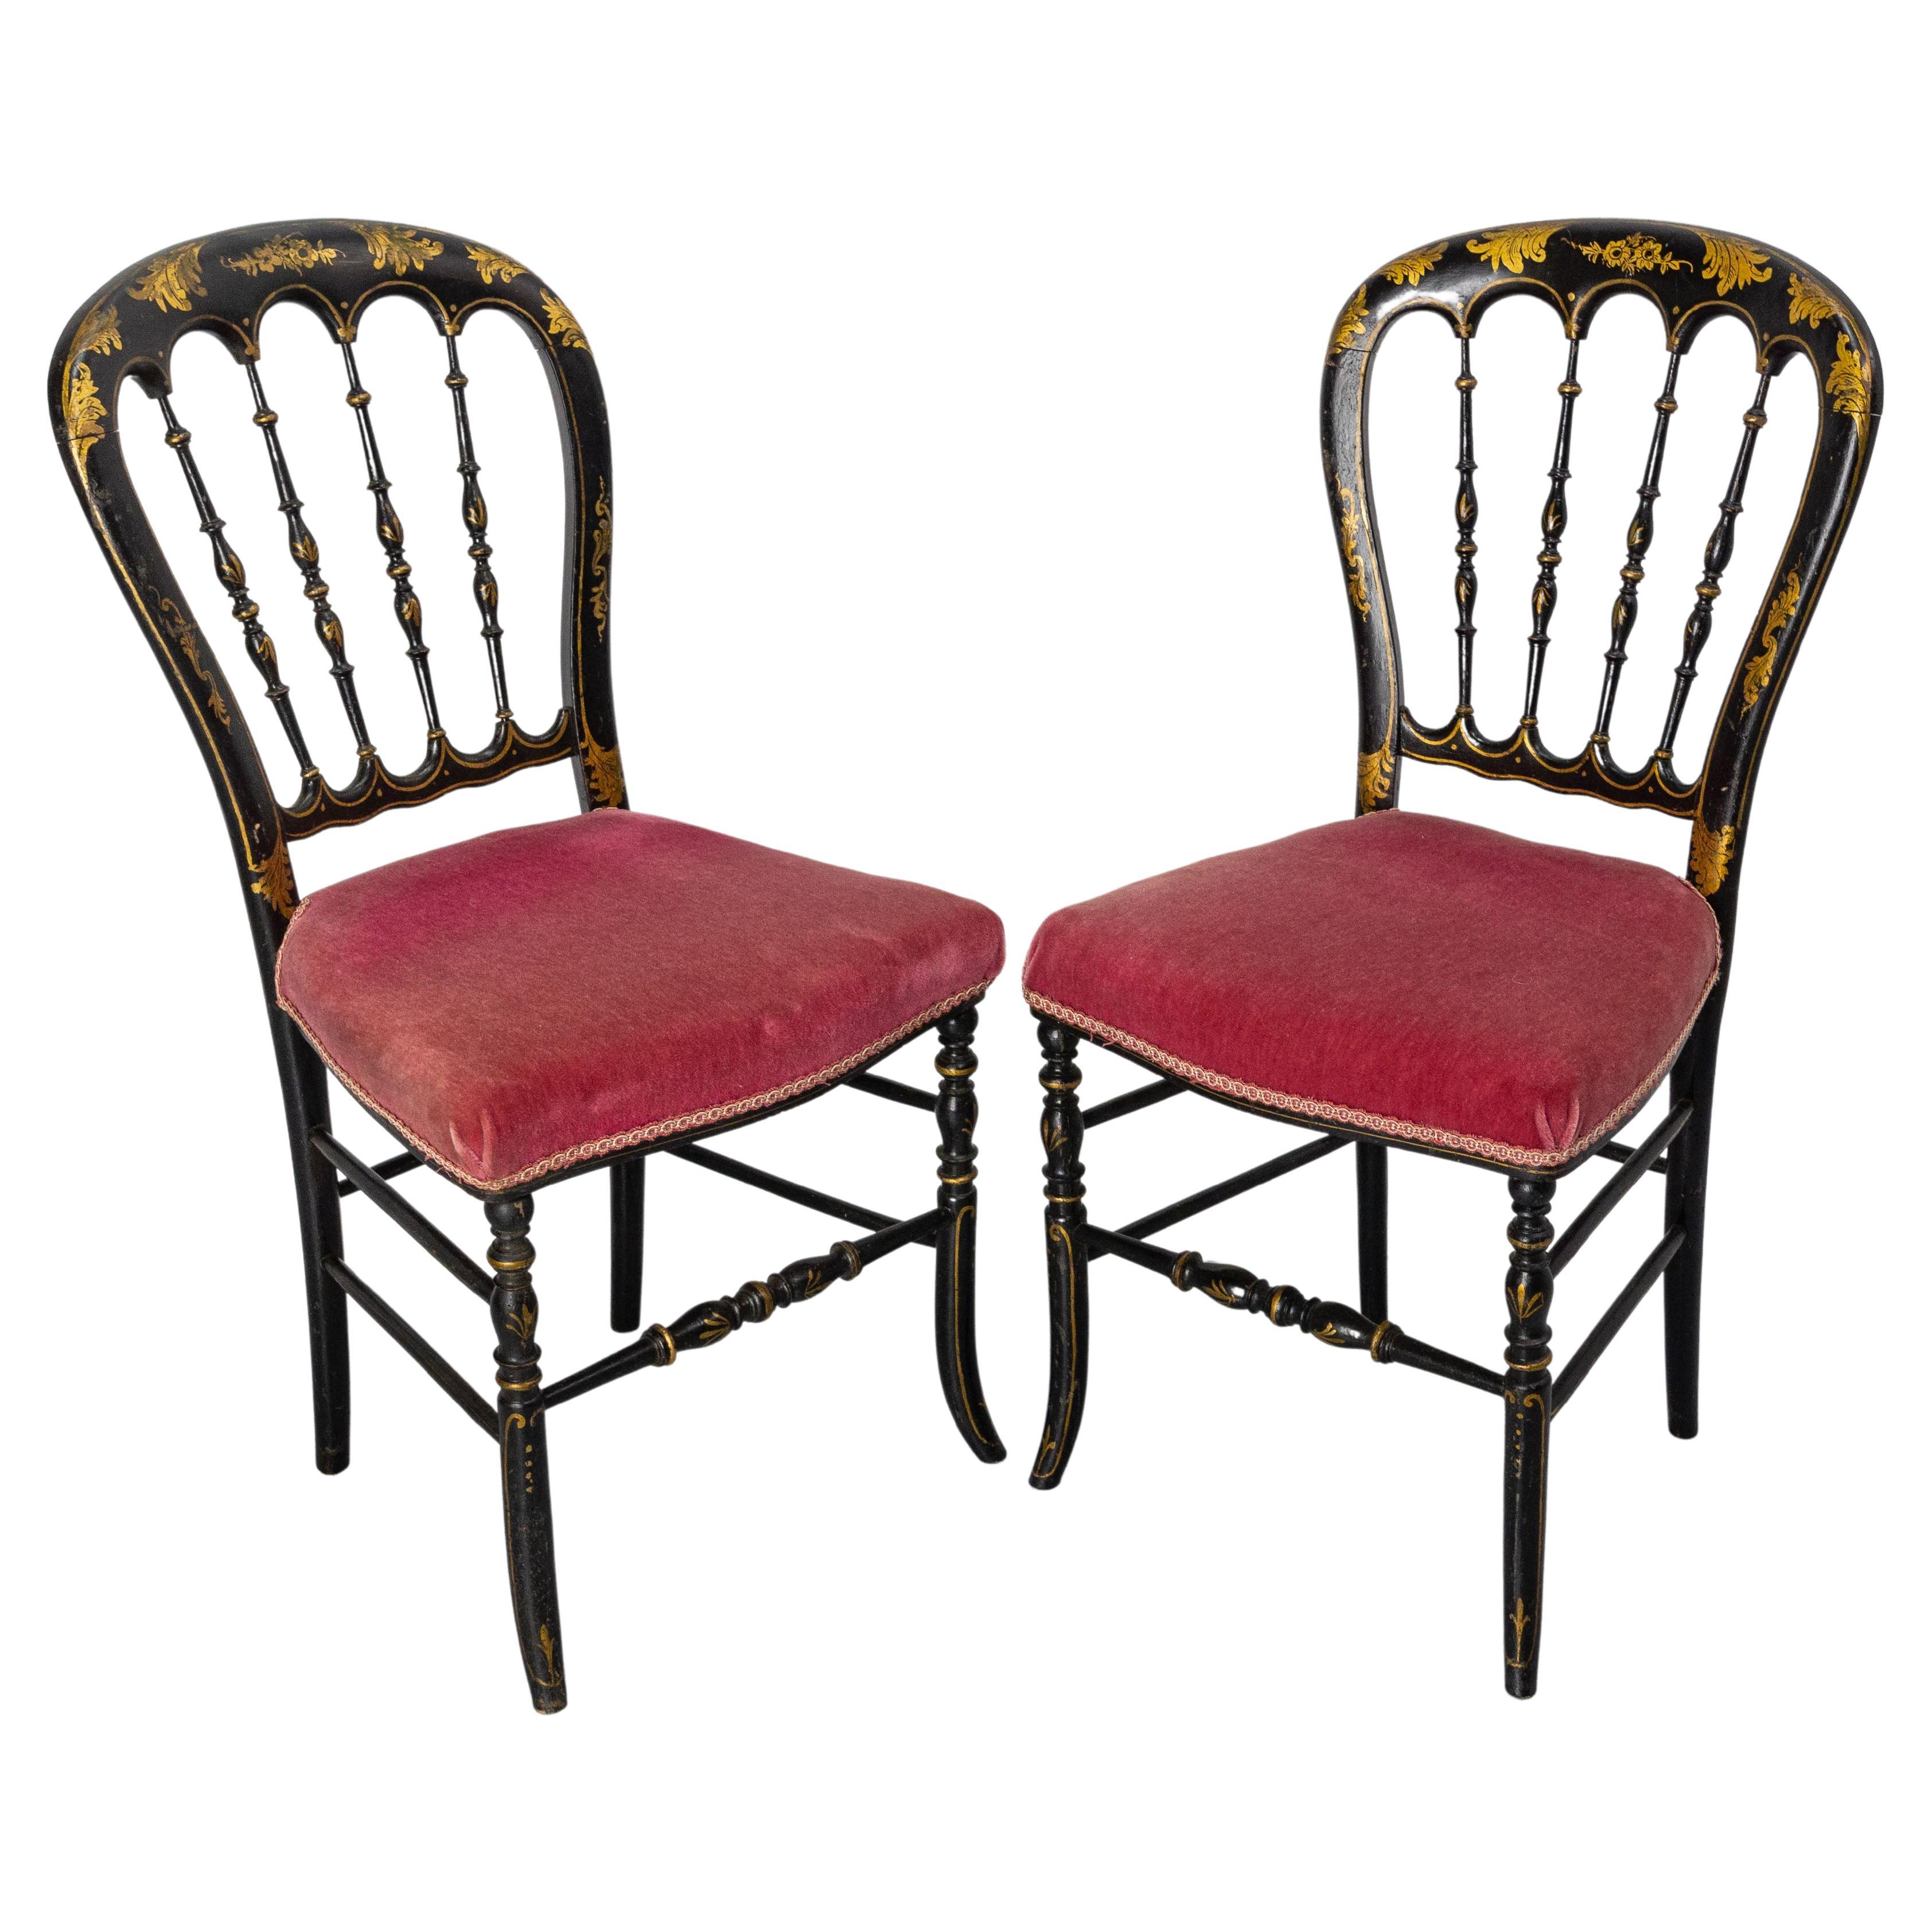 Pair of Napoleon III Chairs Fabric and Painted Wood, French, Late 19th Century For Sale